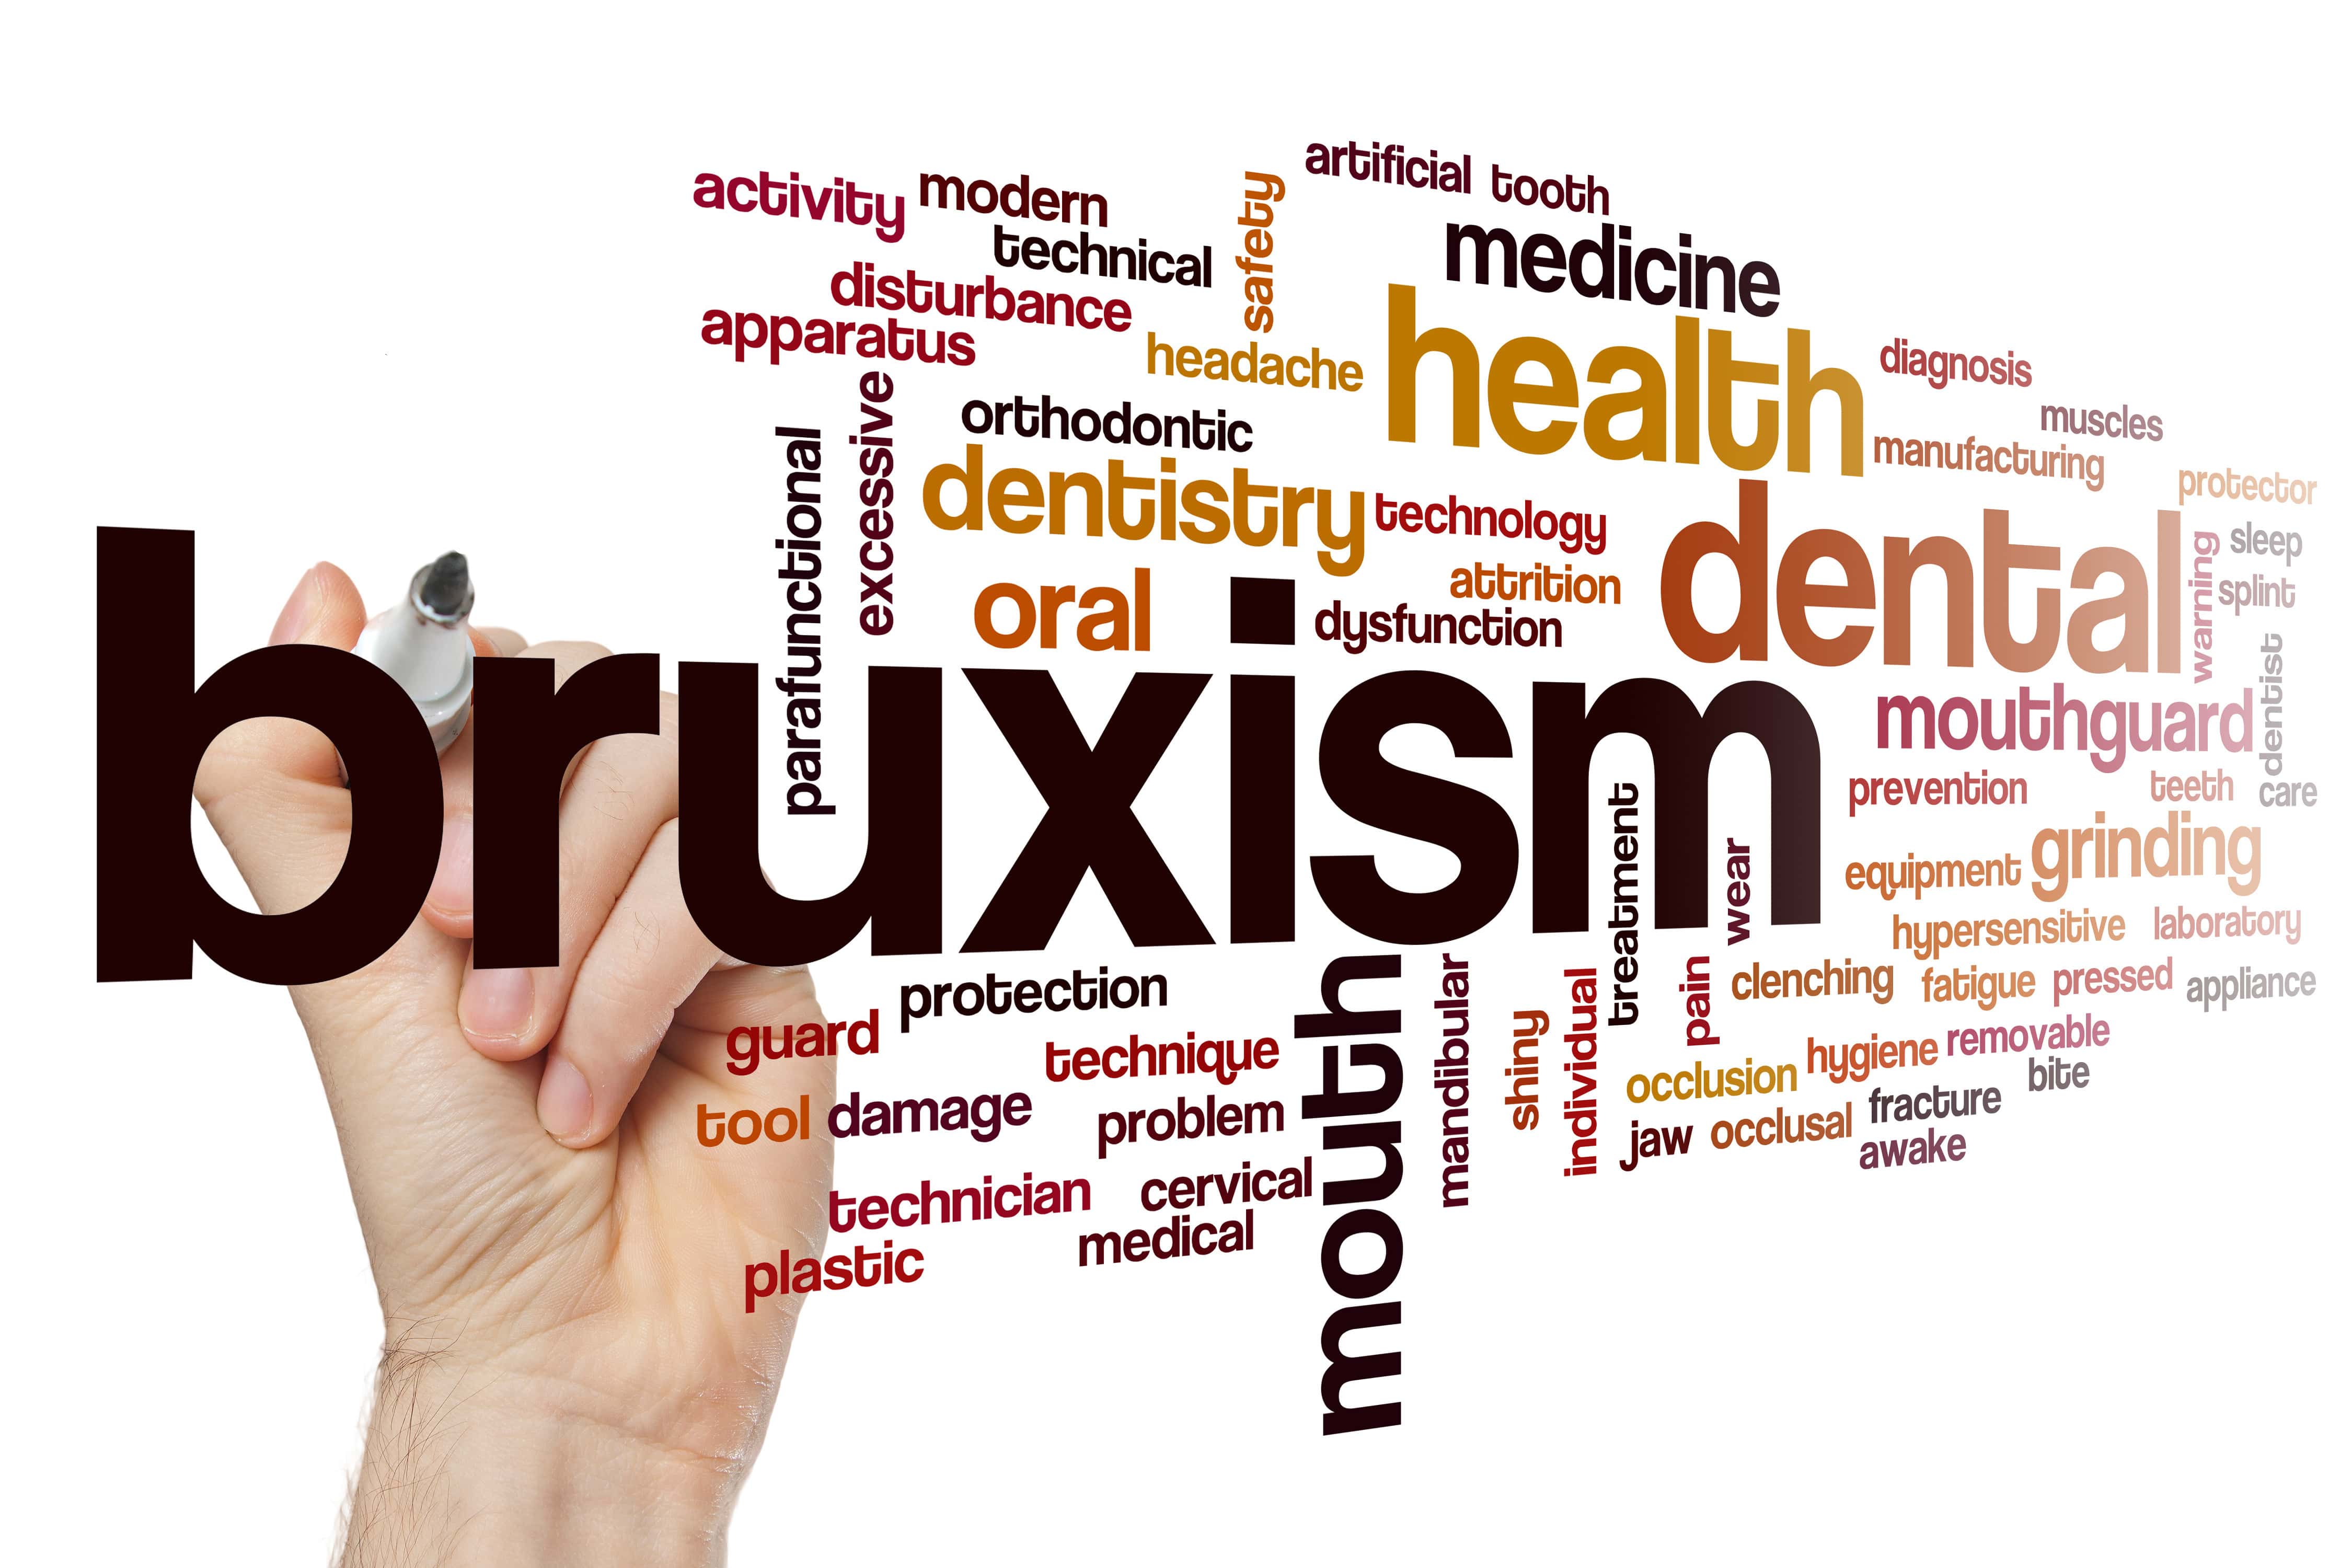 Using Muscle Relaxants for Bruxism